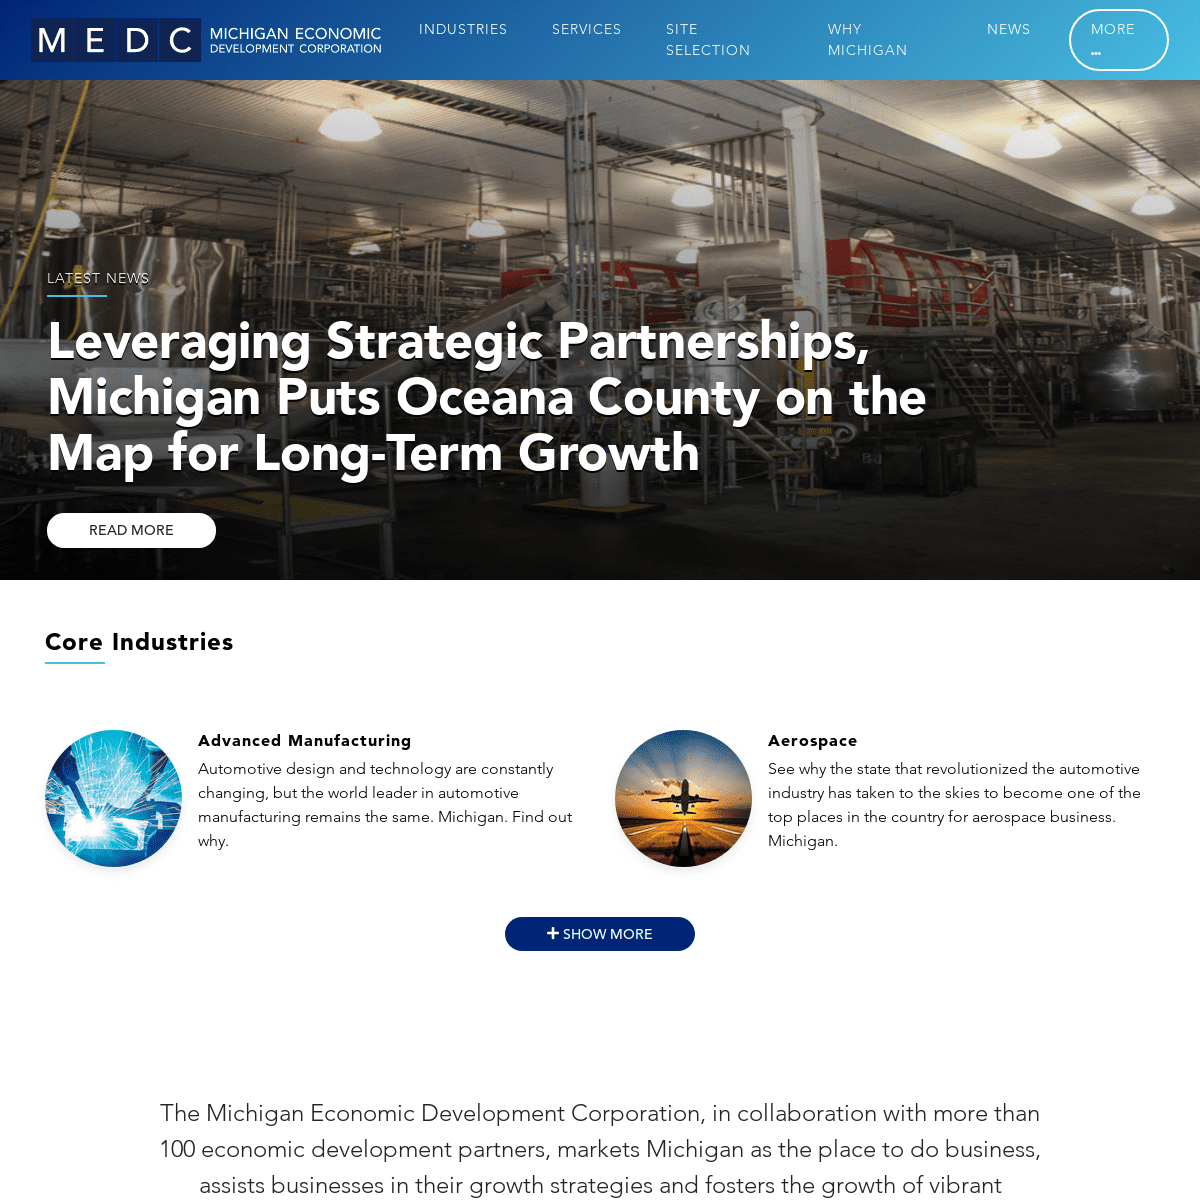 A complete backup of michiganbusiness.org